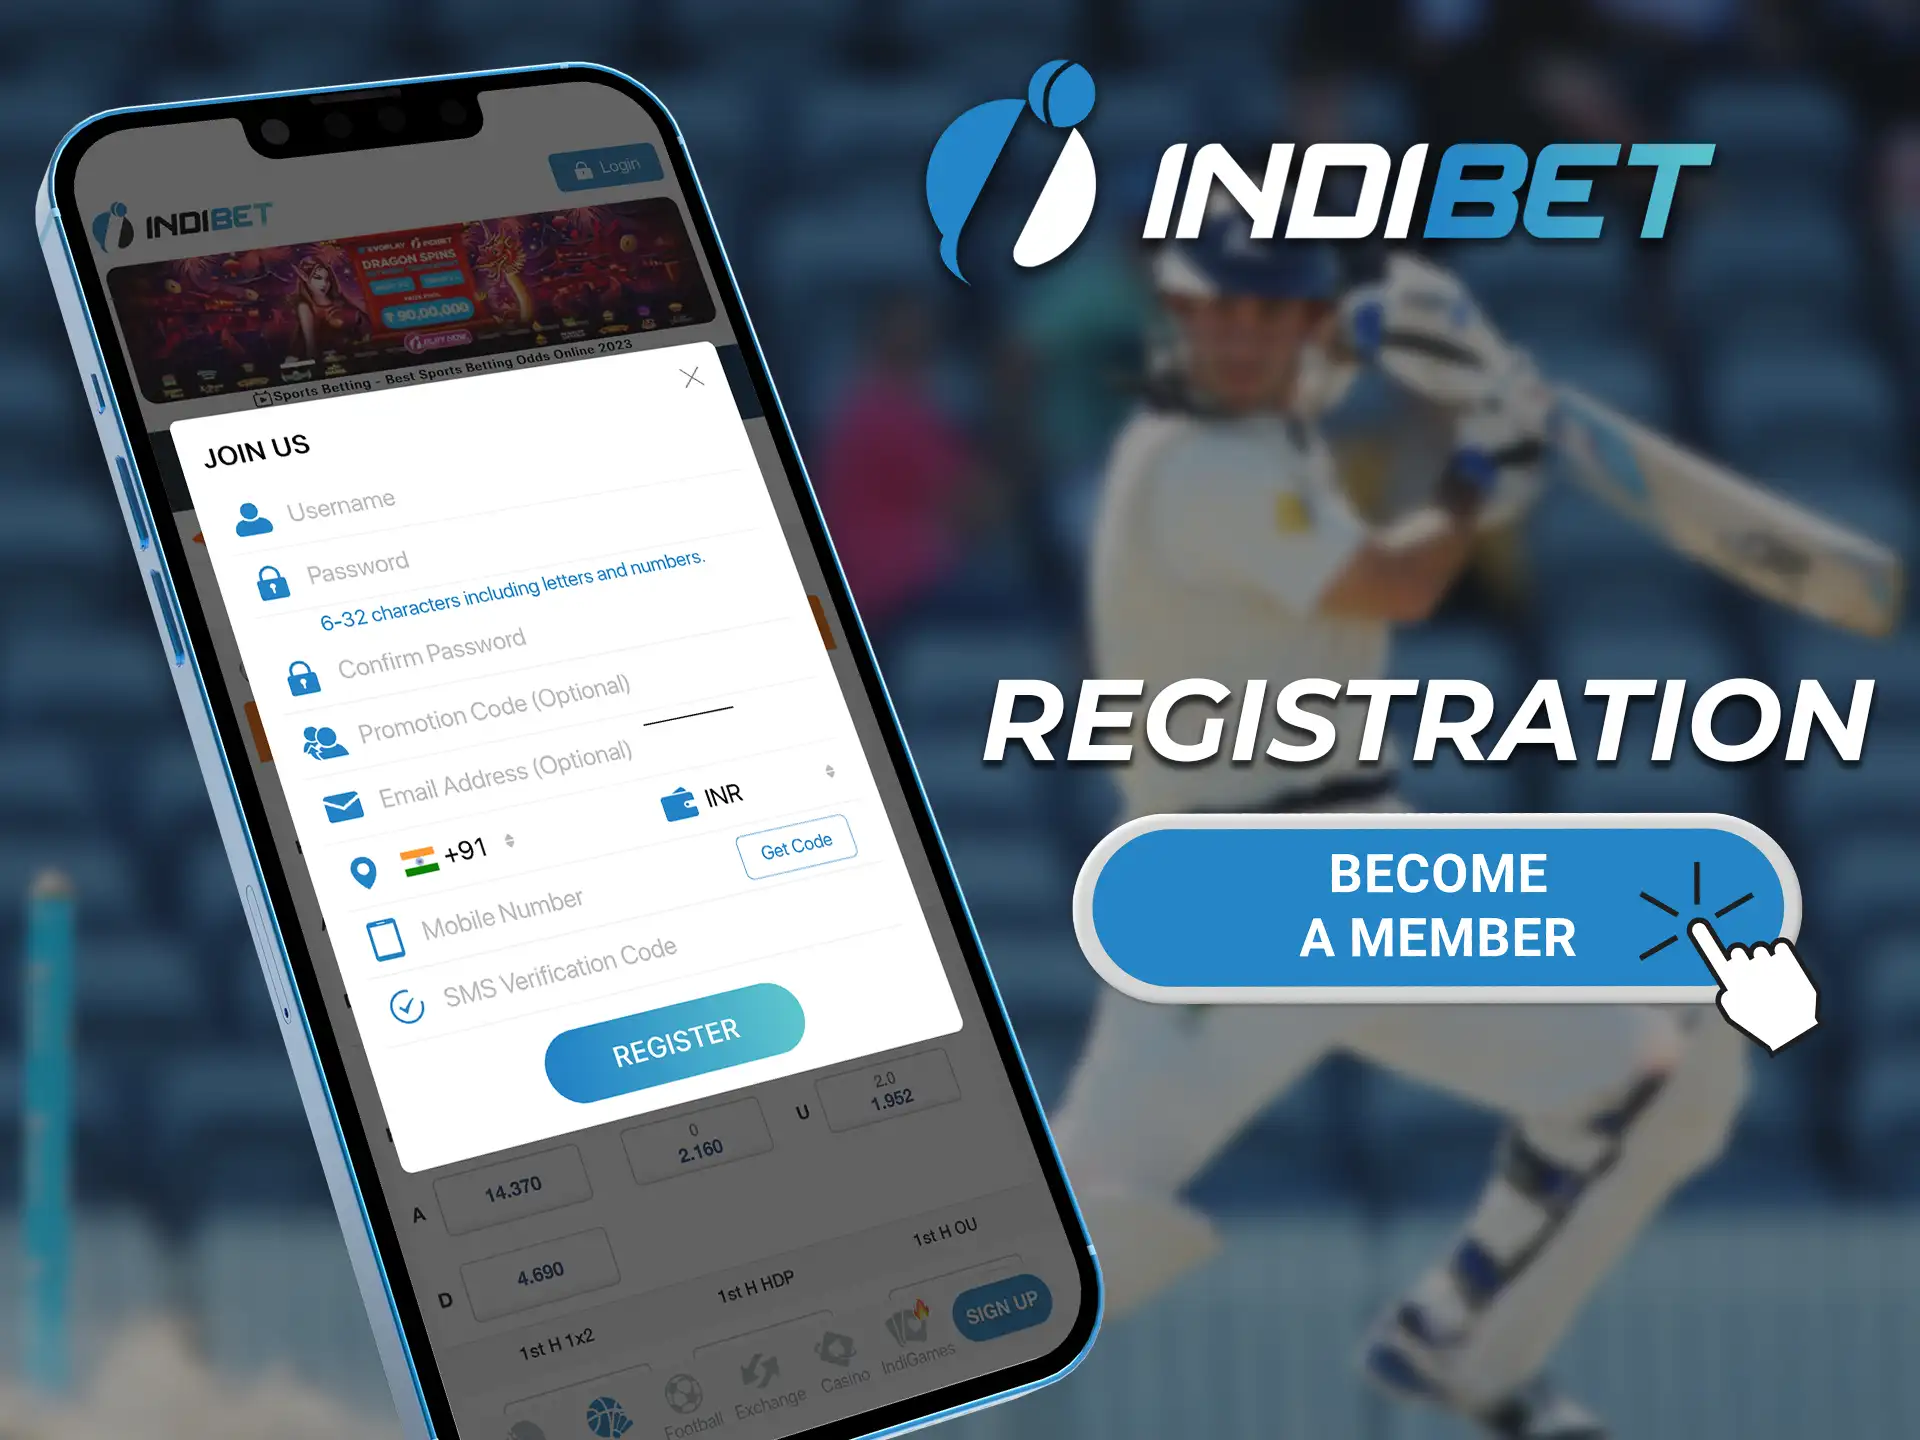 To start earning money, create your account on the Indibet app and fill out the registration form correctly.